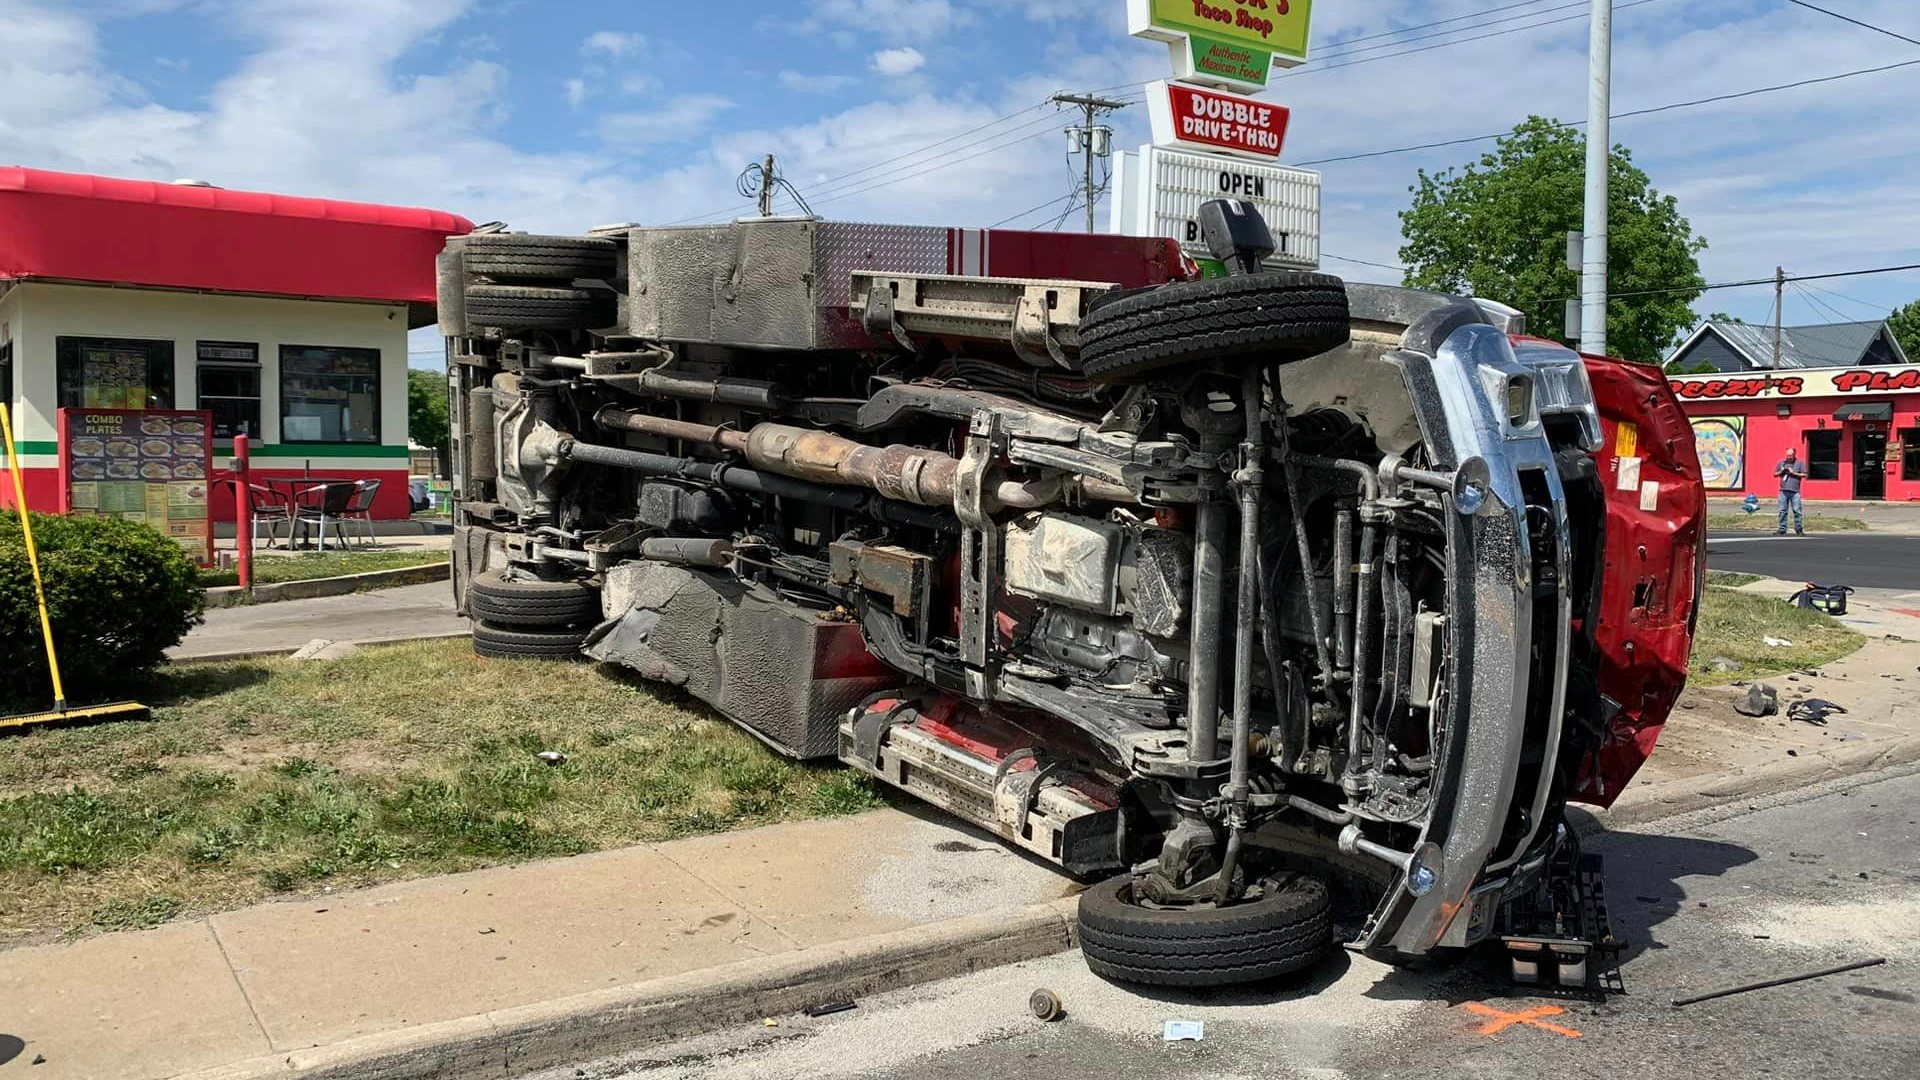 The Marion Fire Department said the crash happened just after 3 p.m. at the intersection of North Main and Fairground streets.